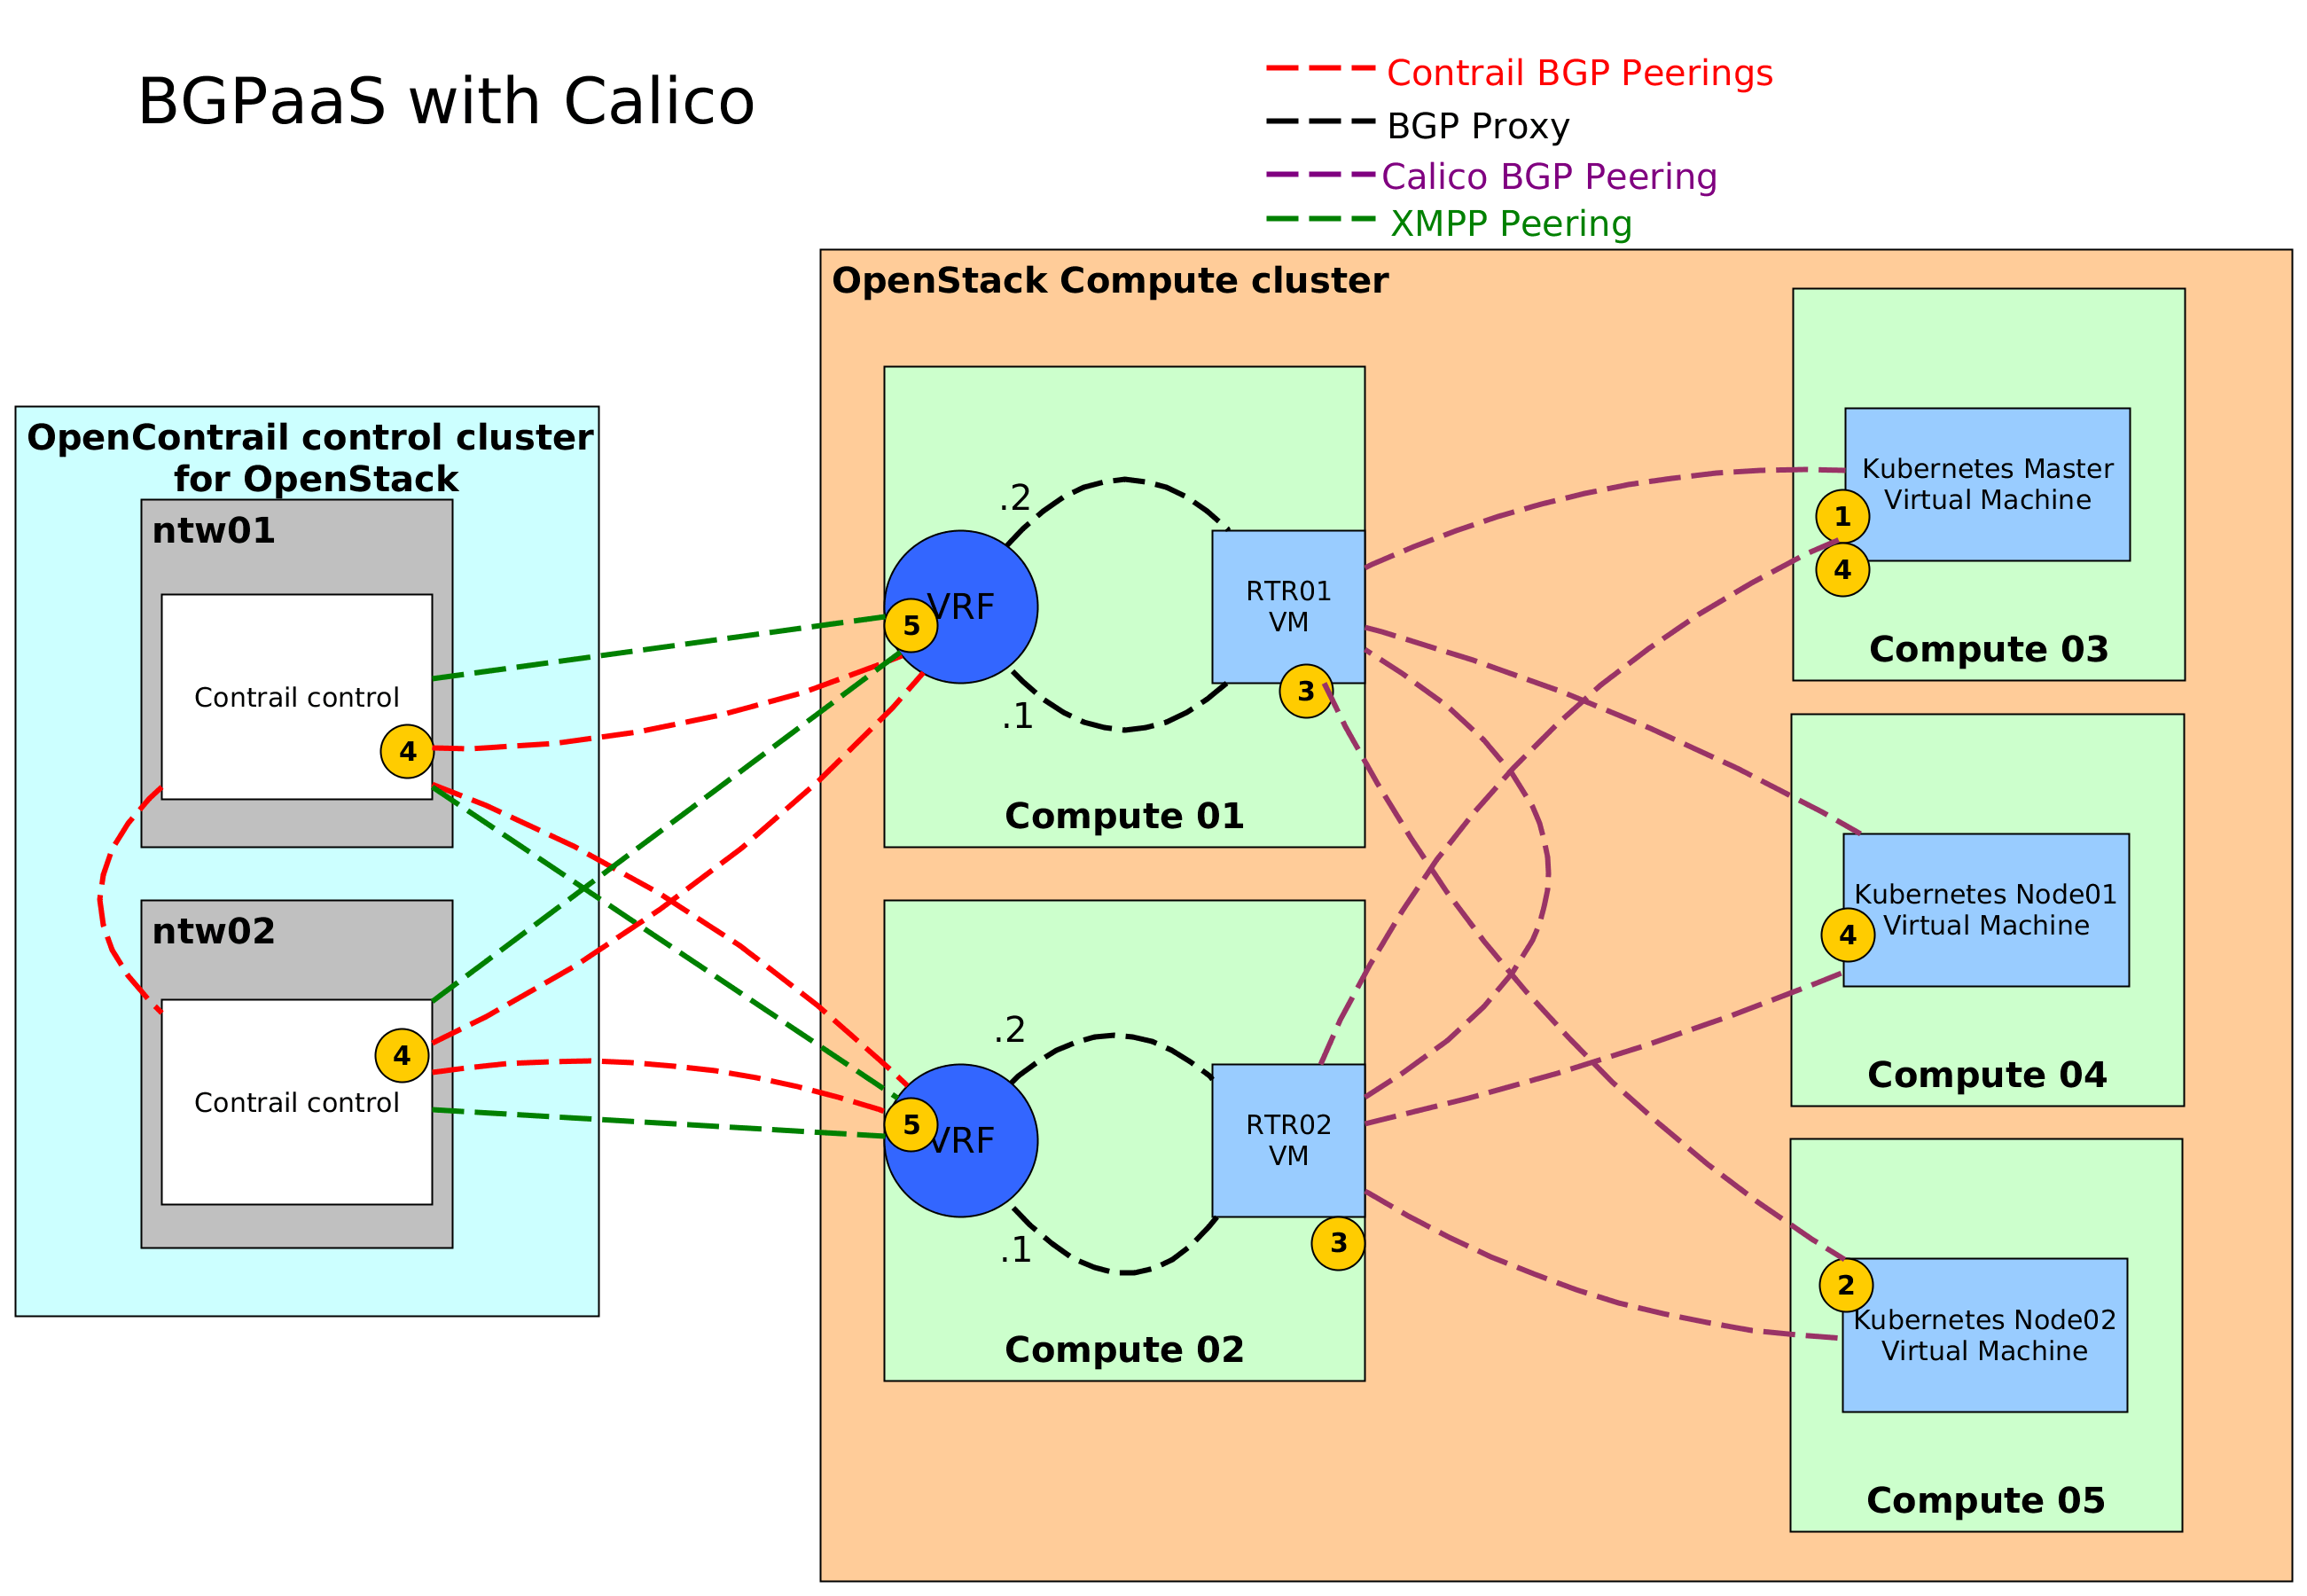 ../_images/bgpAsAService-calico2.png